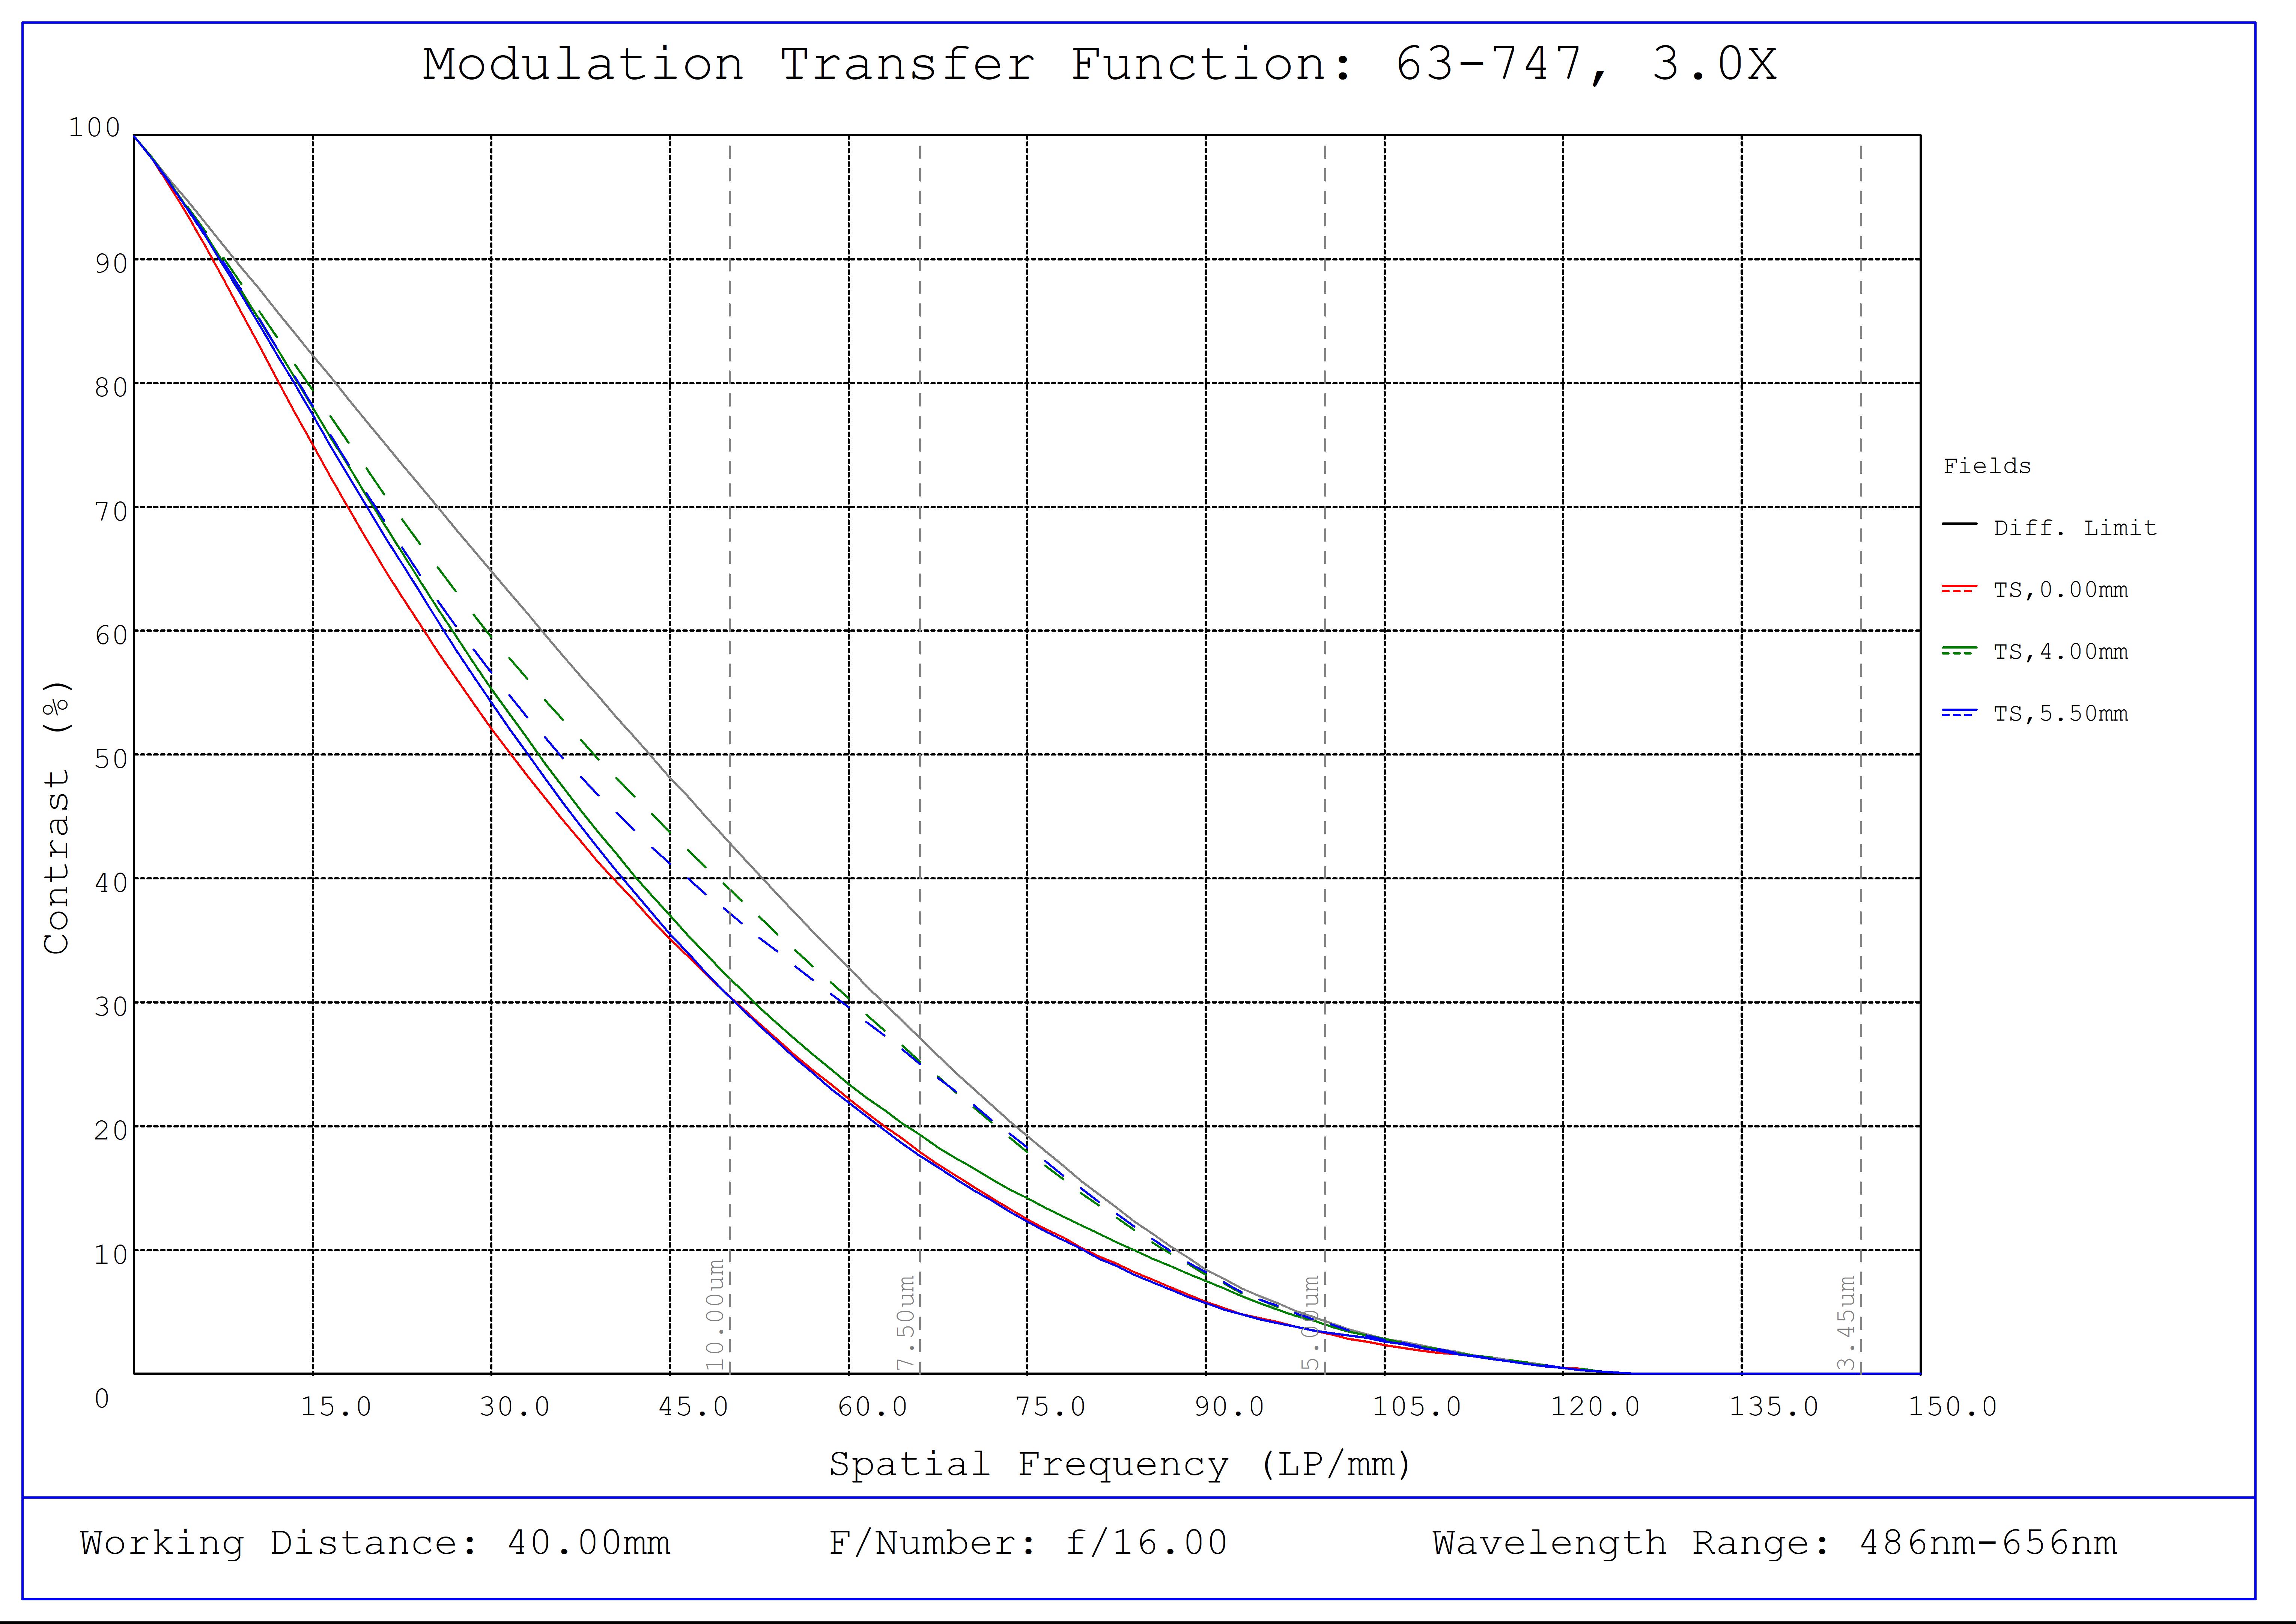 #63-747, 3X, 40mm WD CompactTL™ Telecentric Lens , Modulated Transfer Function (MTF) Plot, 40mm Working Distance, f16